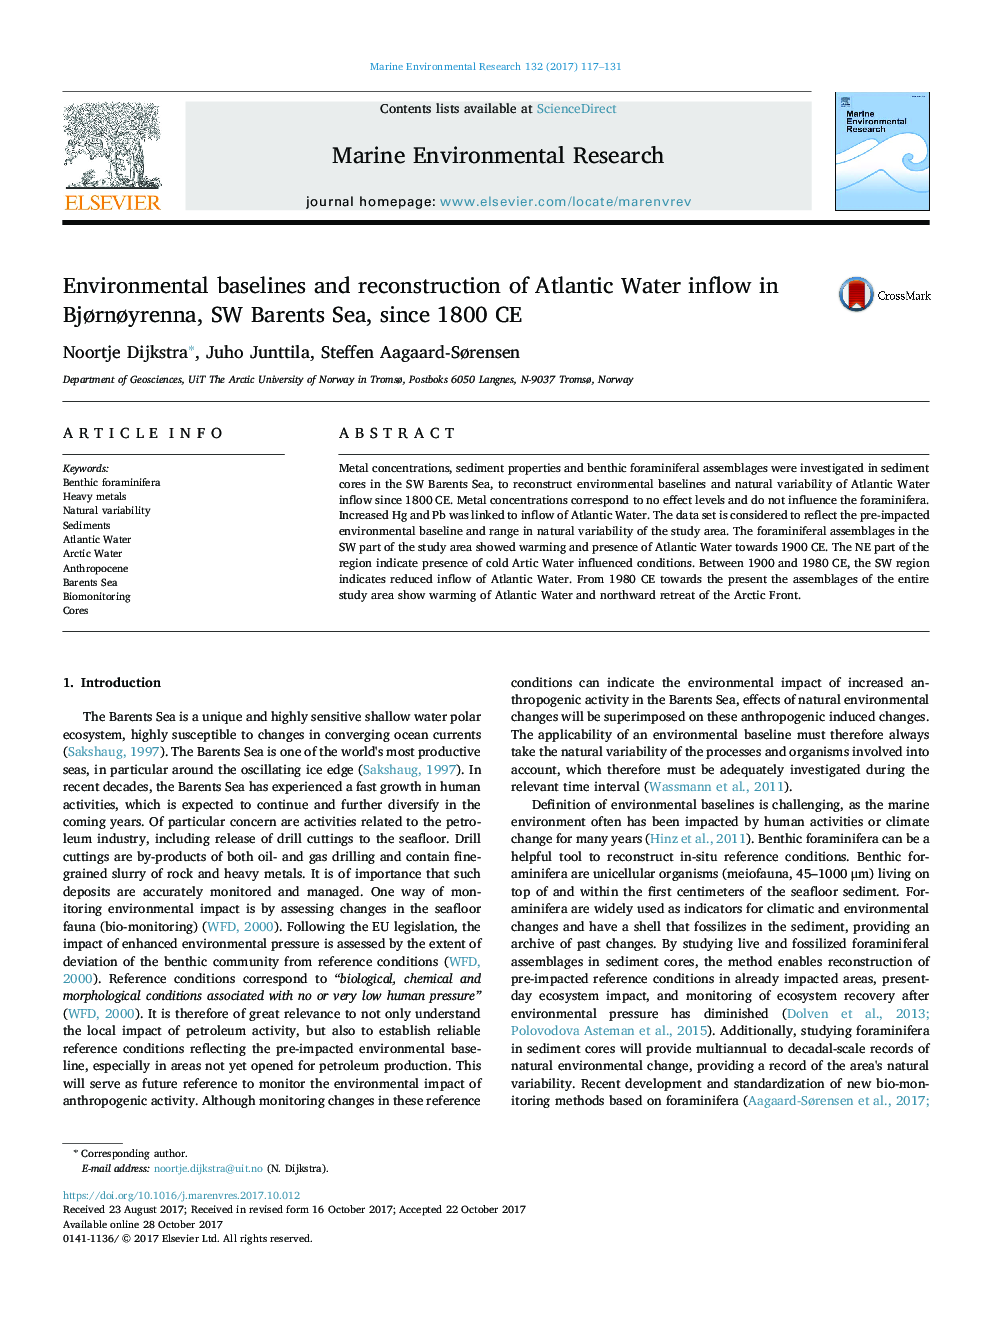 Environmental baselines and reconstruction of Atlantic Water inflow in BjÃ¸rnÃ¸yrenna, SW Barents Sea, since 1800Â CE